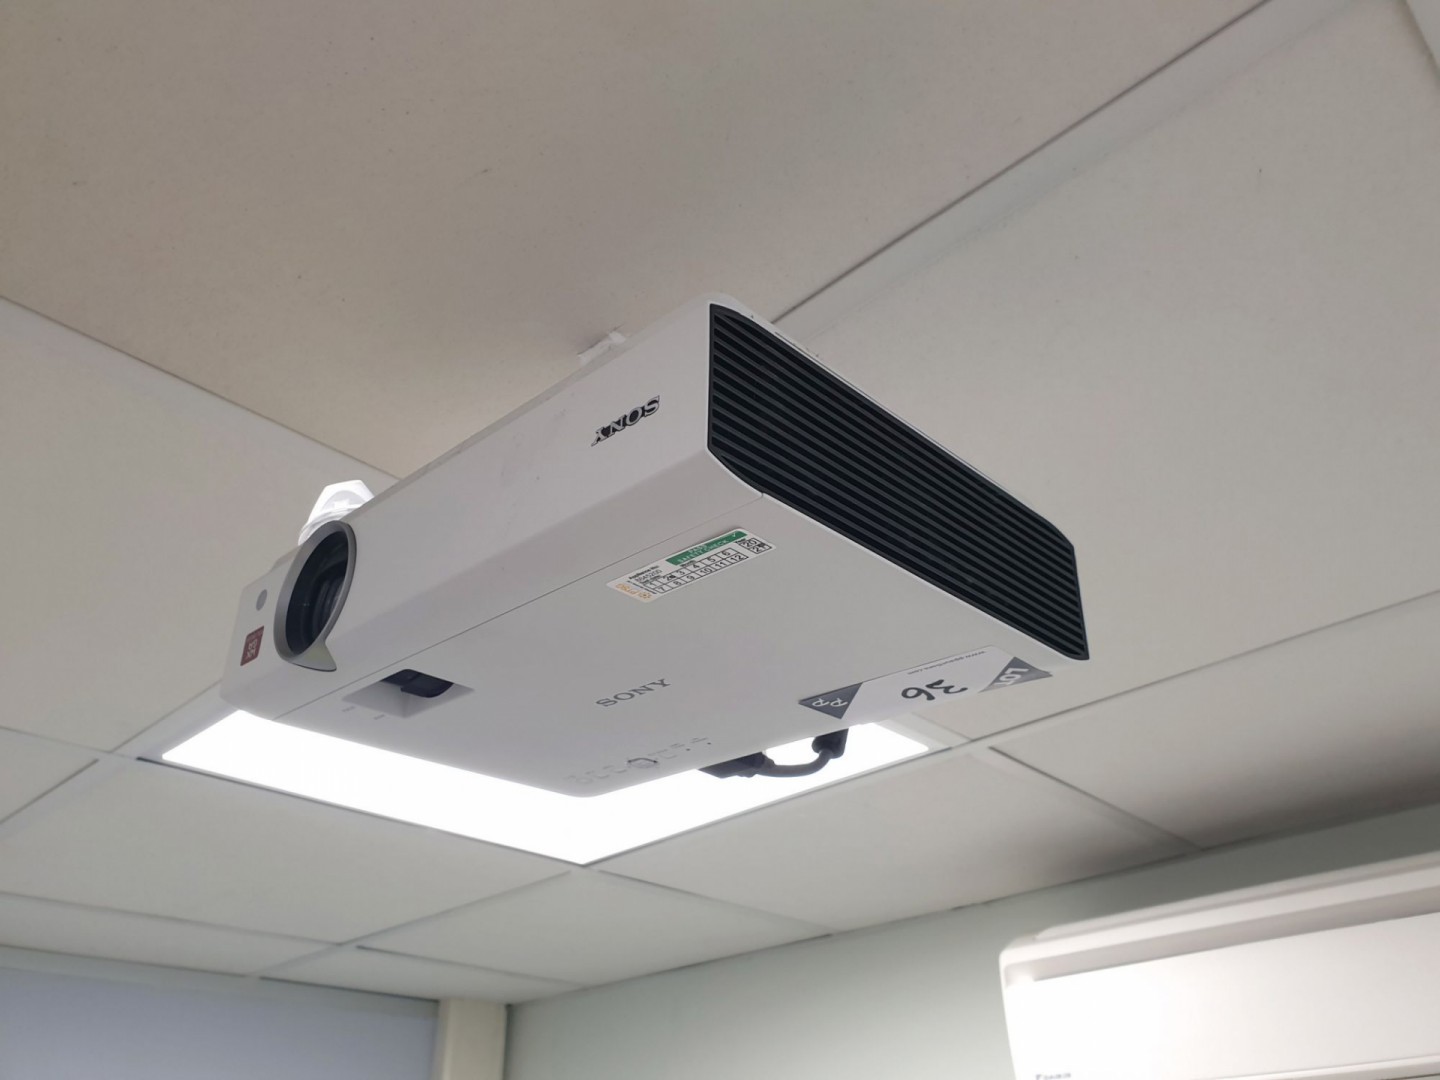 Sony VPL-DW120 data projector with Celexon pull do...